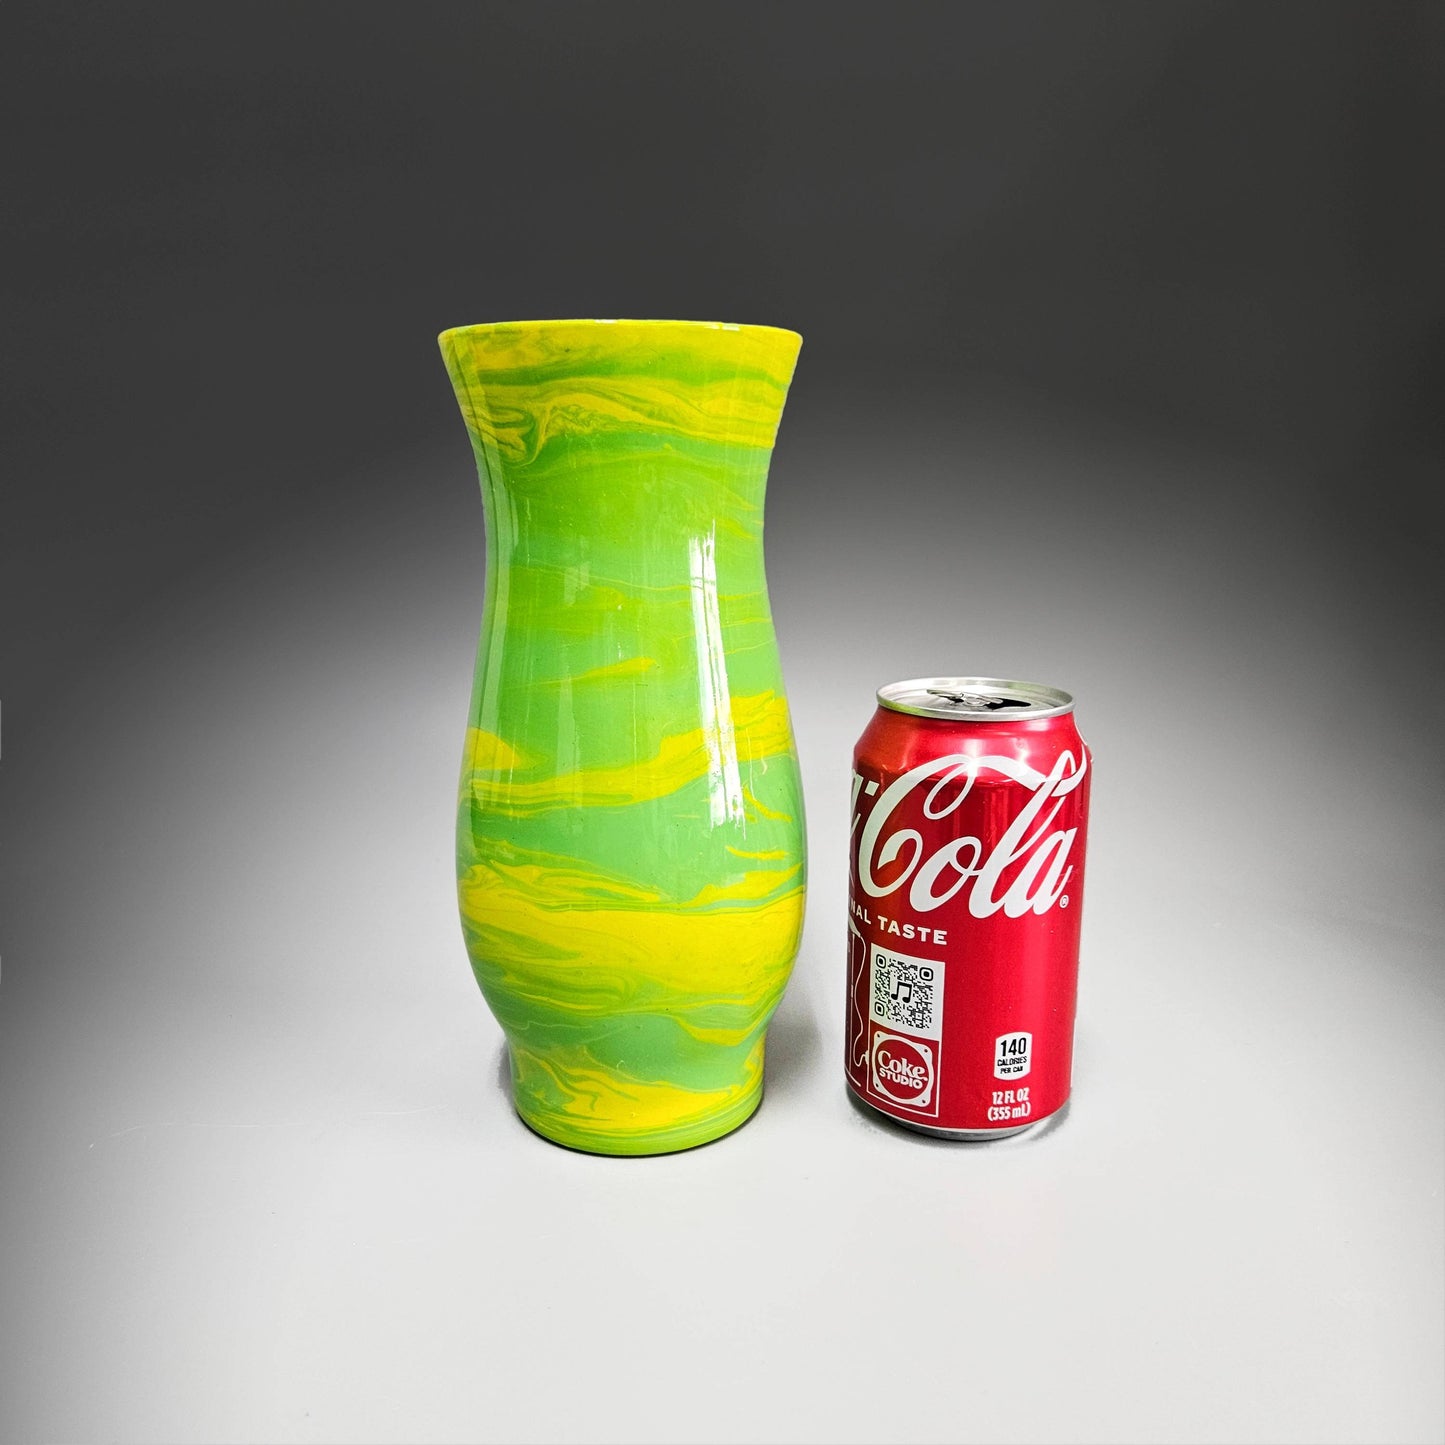 Glass Art Painted Vase in Bright Green and Yellow